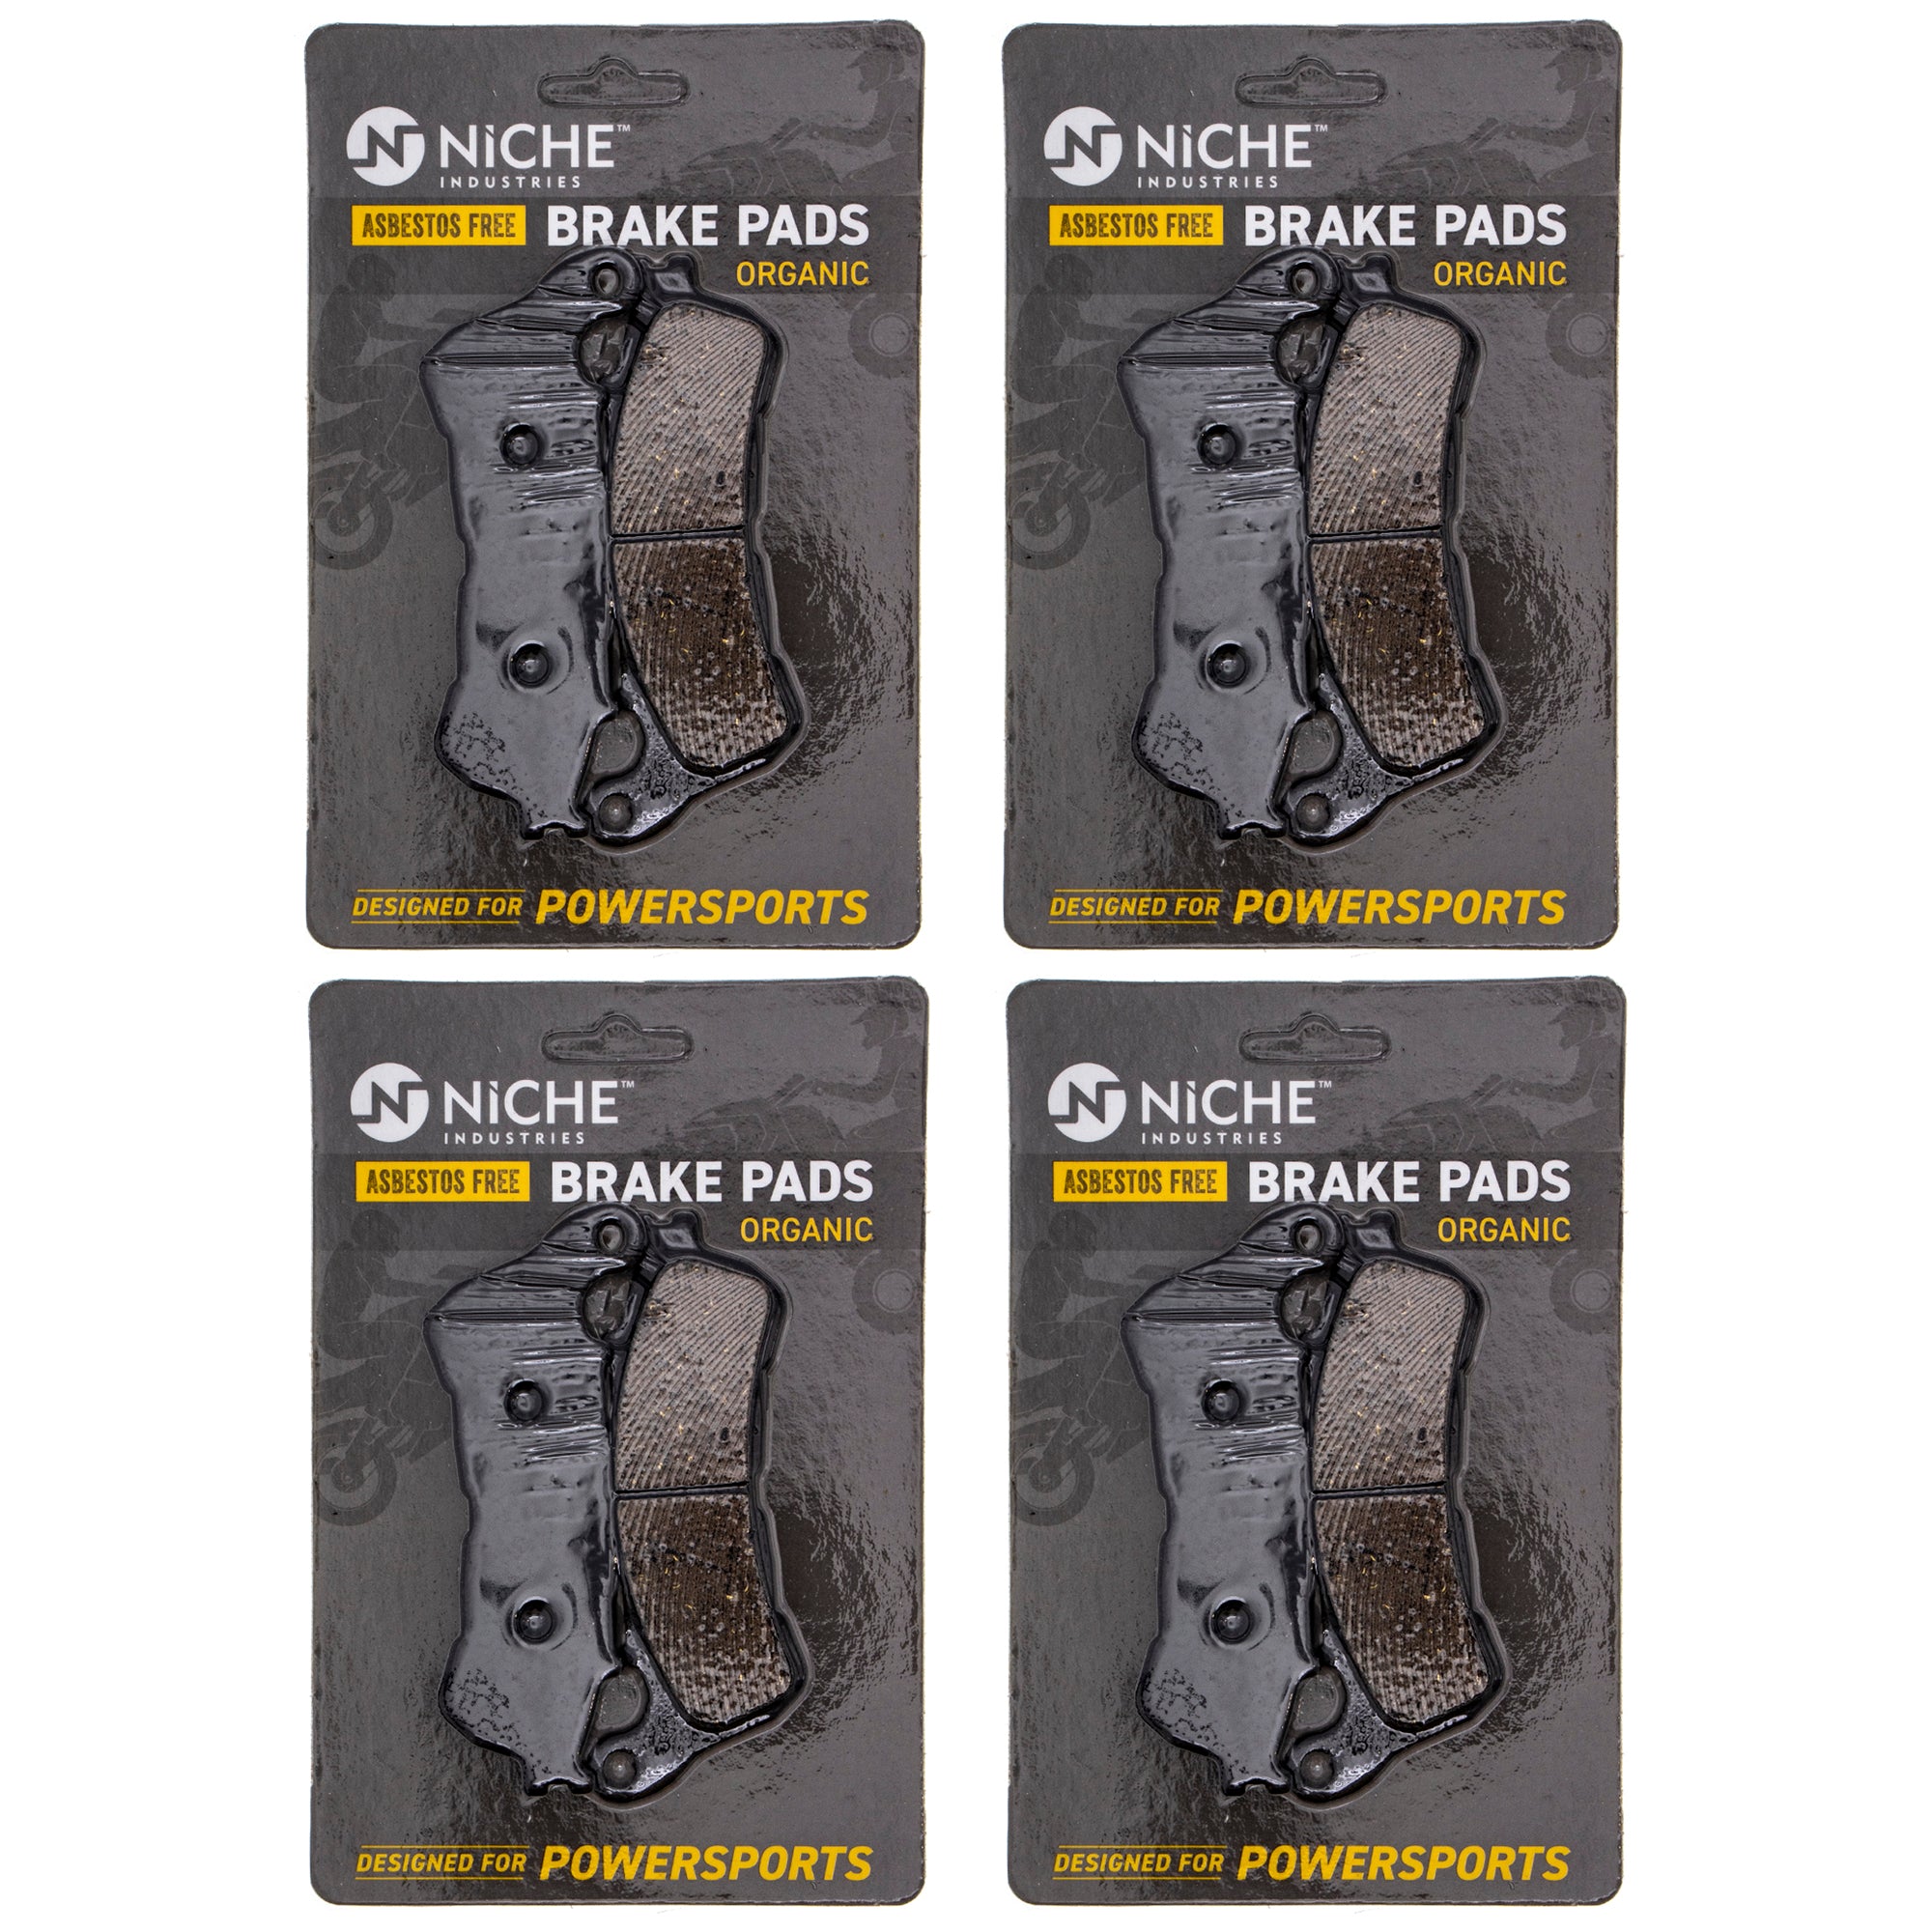 Brake Pad Set (Front & Rear) 4-Pack for zOTHER Honda Stateline ST1300 Shadow Sabre NICHE 519-KPA2536D